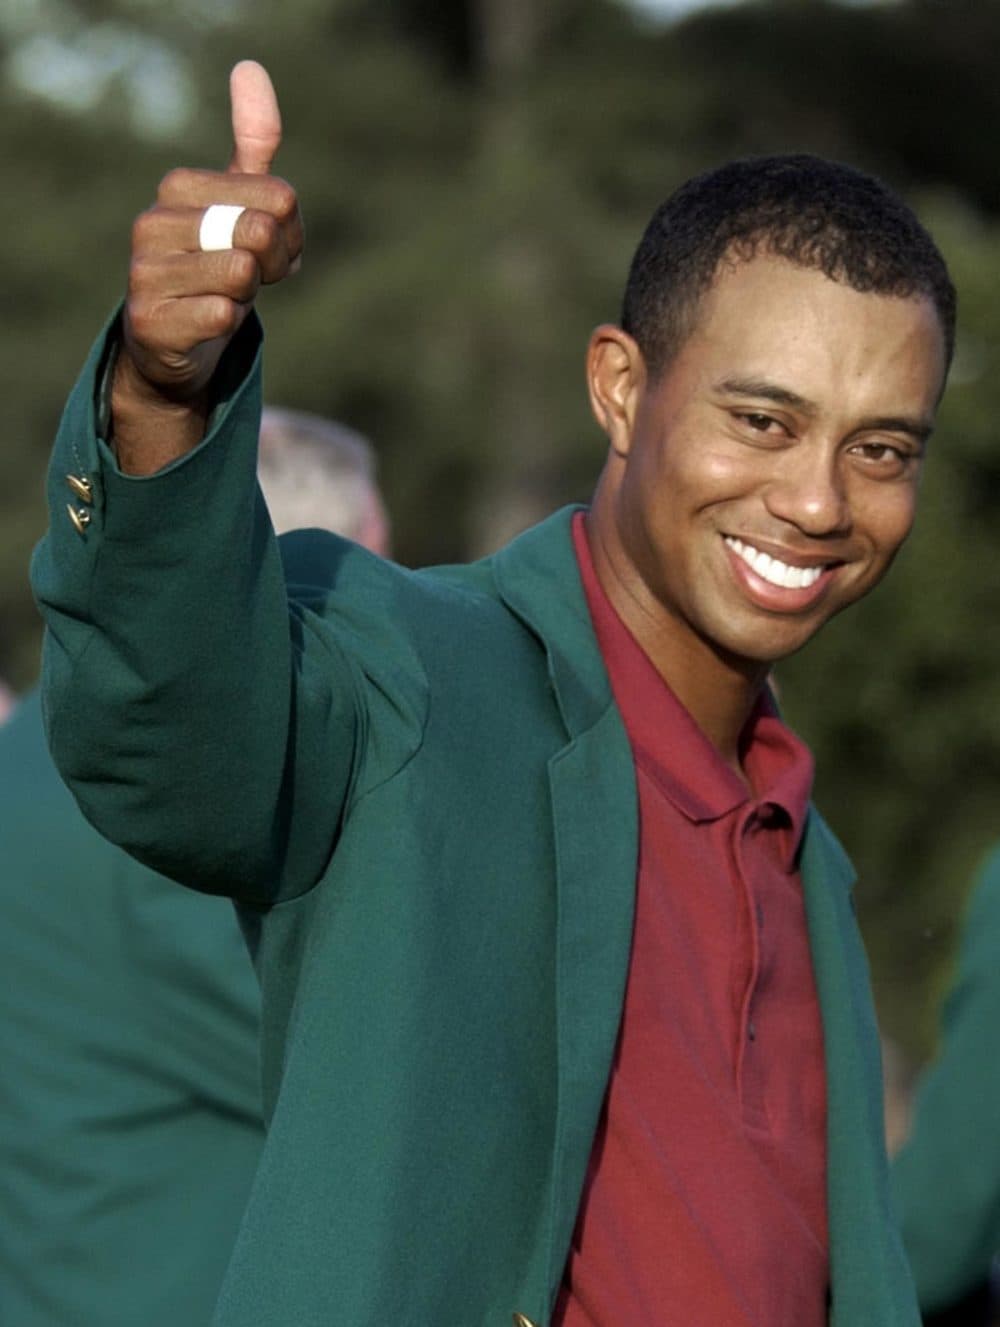 Tiger Woods celebrates after winning the Masters Tournament in Augusta, GA in 2002. (AP File Photo)